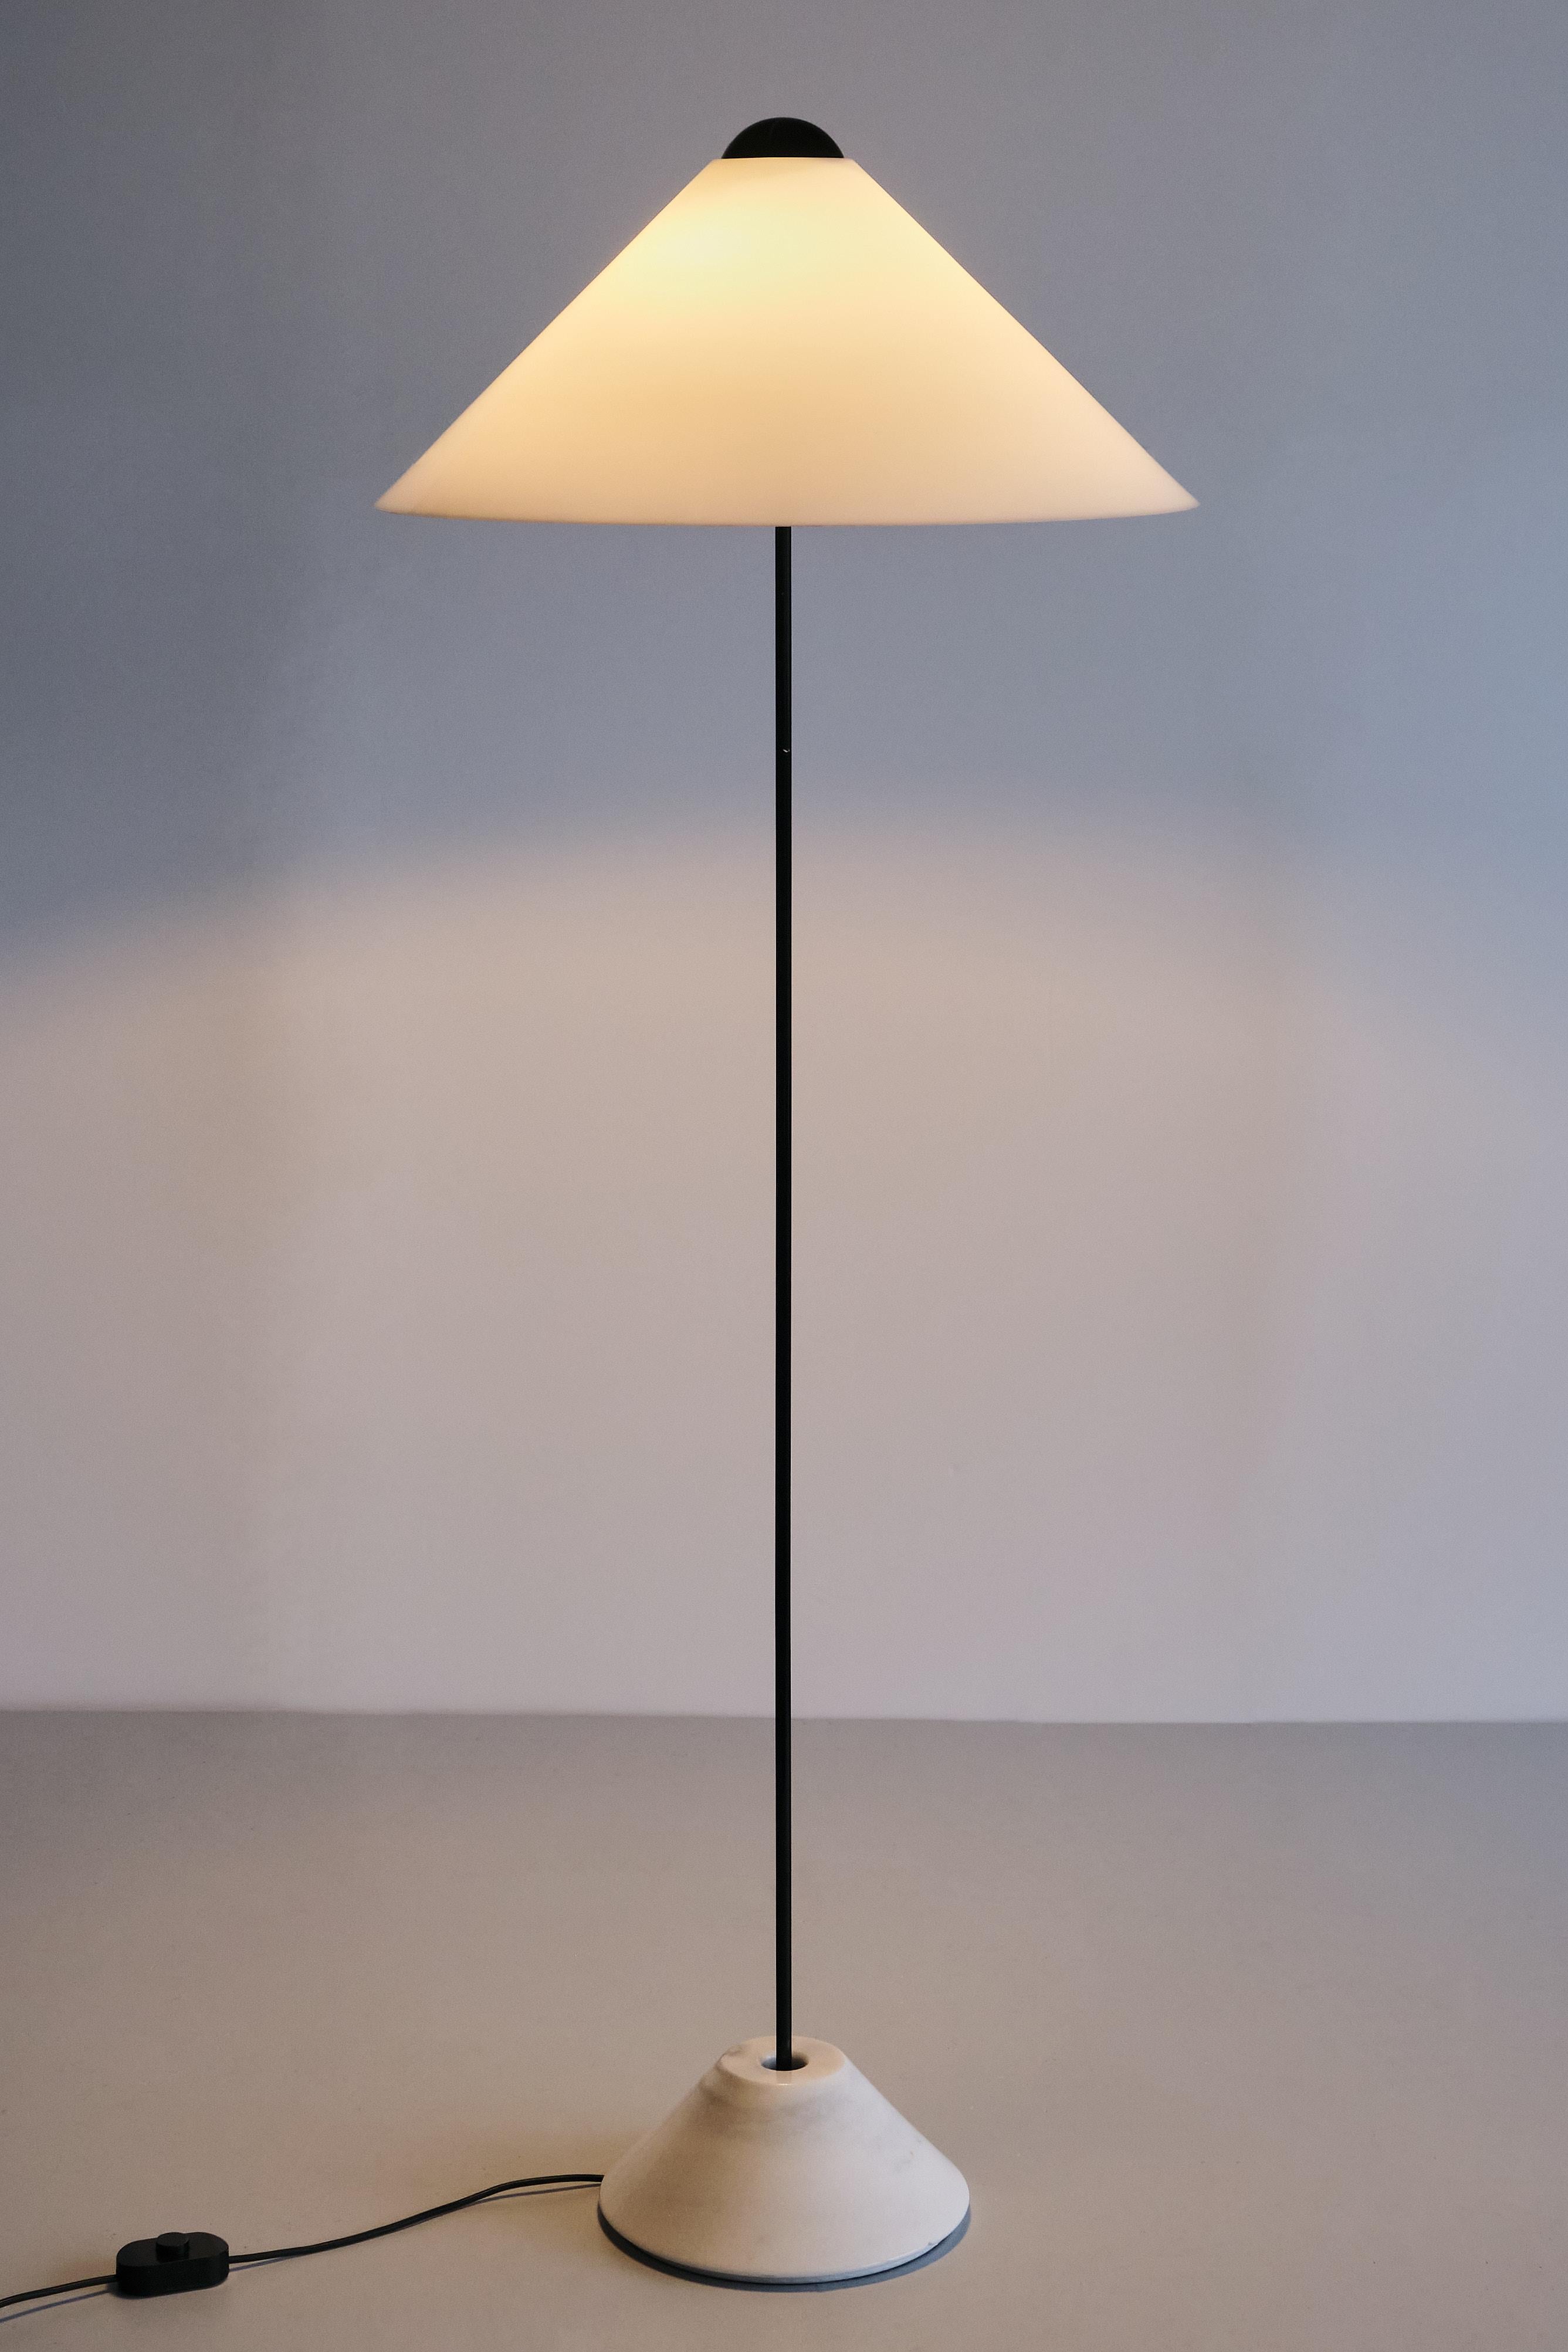 Italian Vico Magistretti 'Snow' Floor Lamp in Metal and Marble, Oluce, Italy, 1973 For Sale